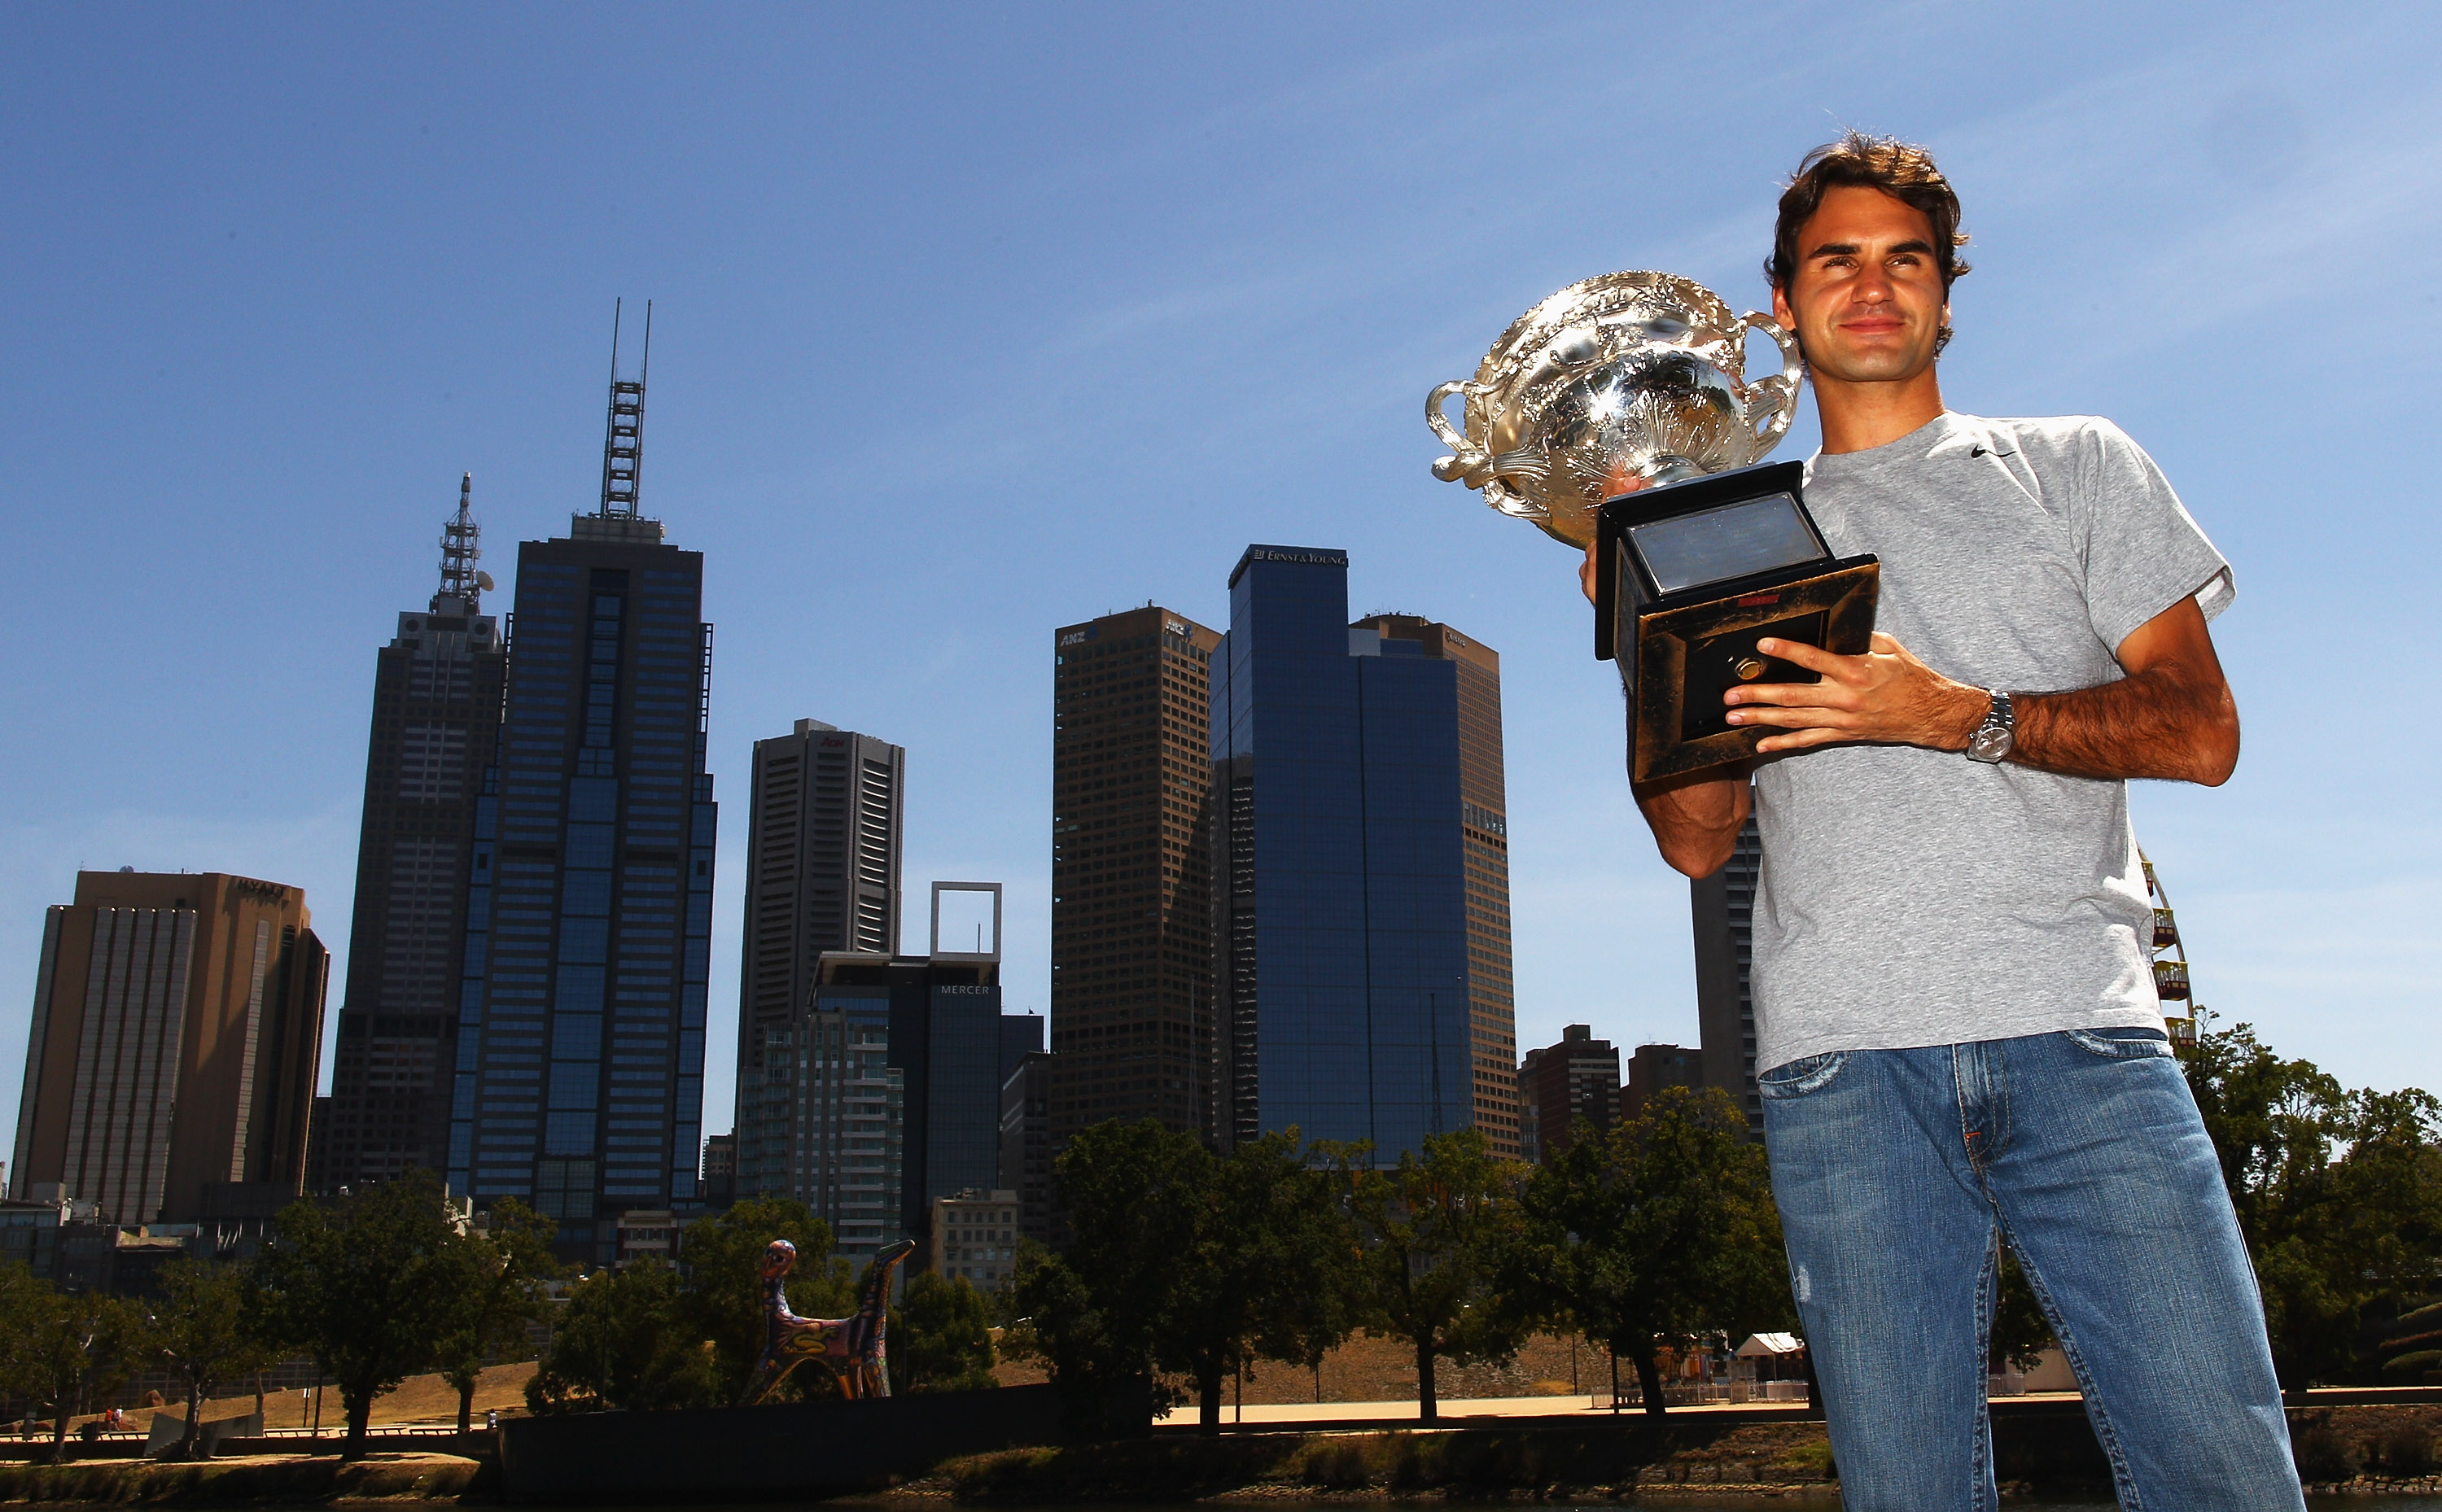 MELBOURNE, AUSTRALIA - FEBRUARY 01:  Roger Federer of Switzerland poses with the Australian Open 2010 winners trophy on Boathouse Drive on February 1, 2010 in Melbourne, Australia.  (Photo by Mark Dadswell/Getty Images)